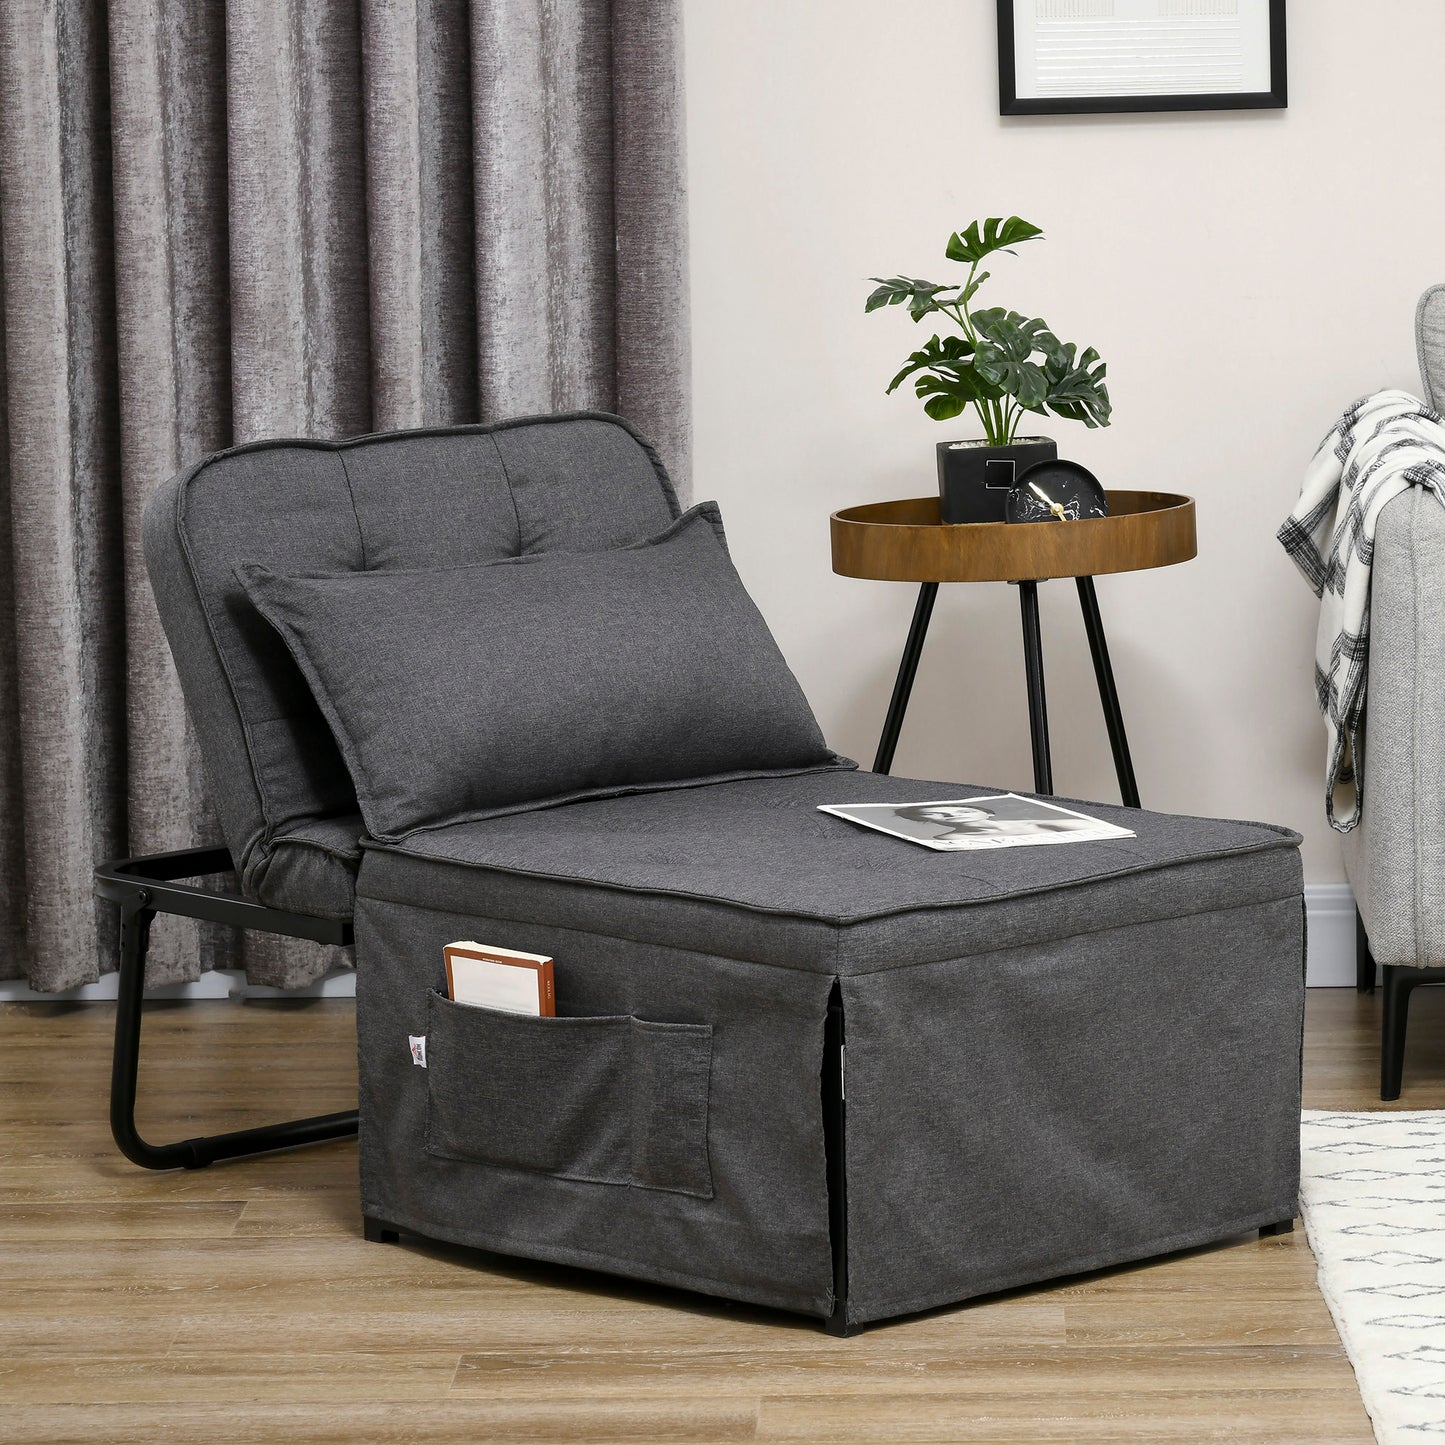 HOMCOM Fabric Sleeper Chair Folding Chair Bed with Adjustable Backrest Pillow Side Pockets for Living Room Charcoal Grey